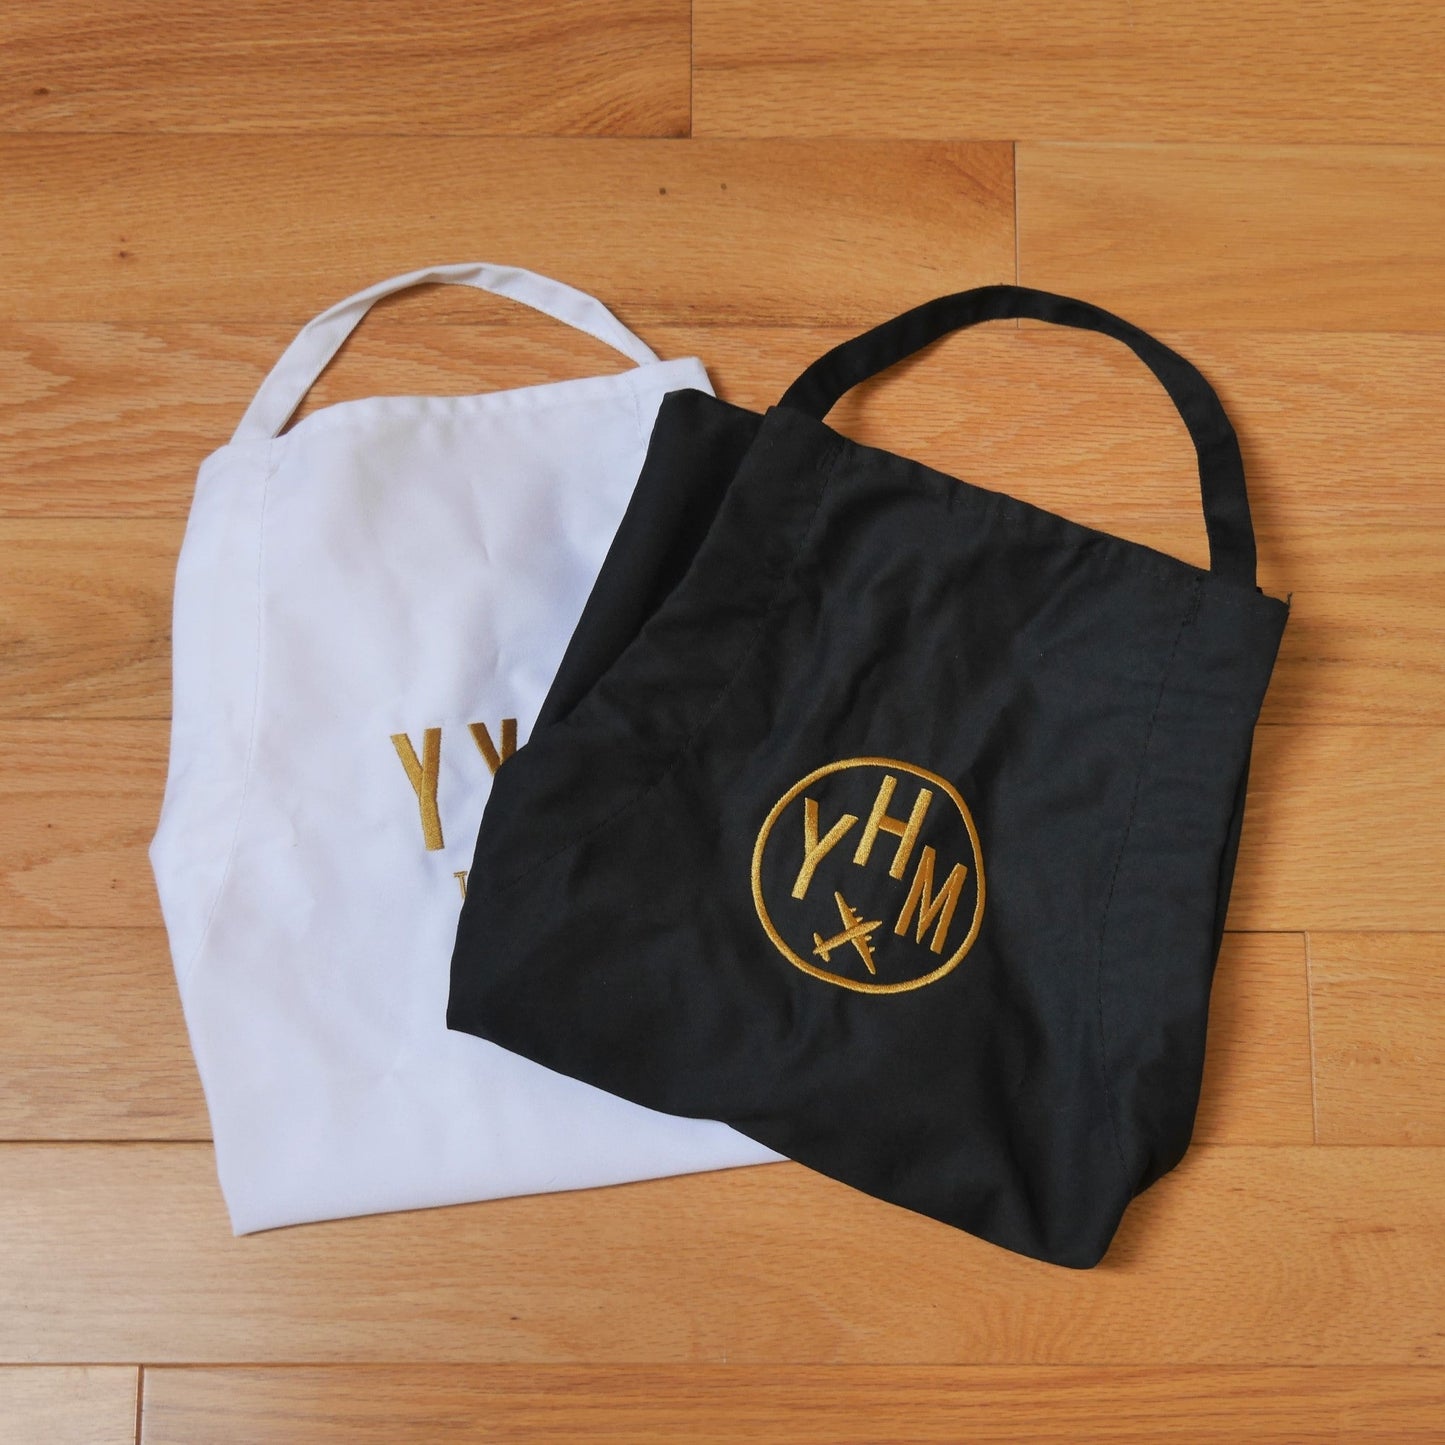 City Embroidered Apron - Old Gold • HNL Honolulu • YHM Designs - Image 14